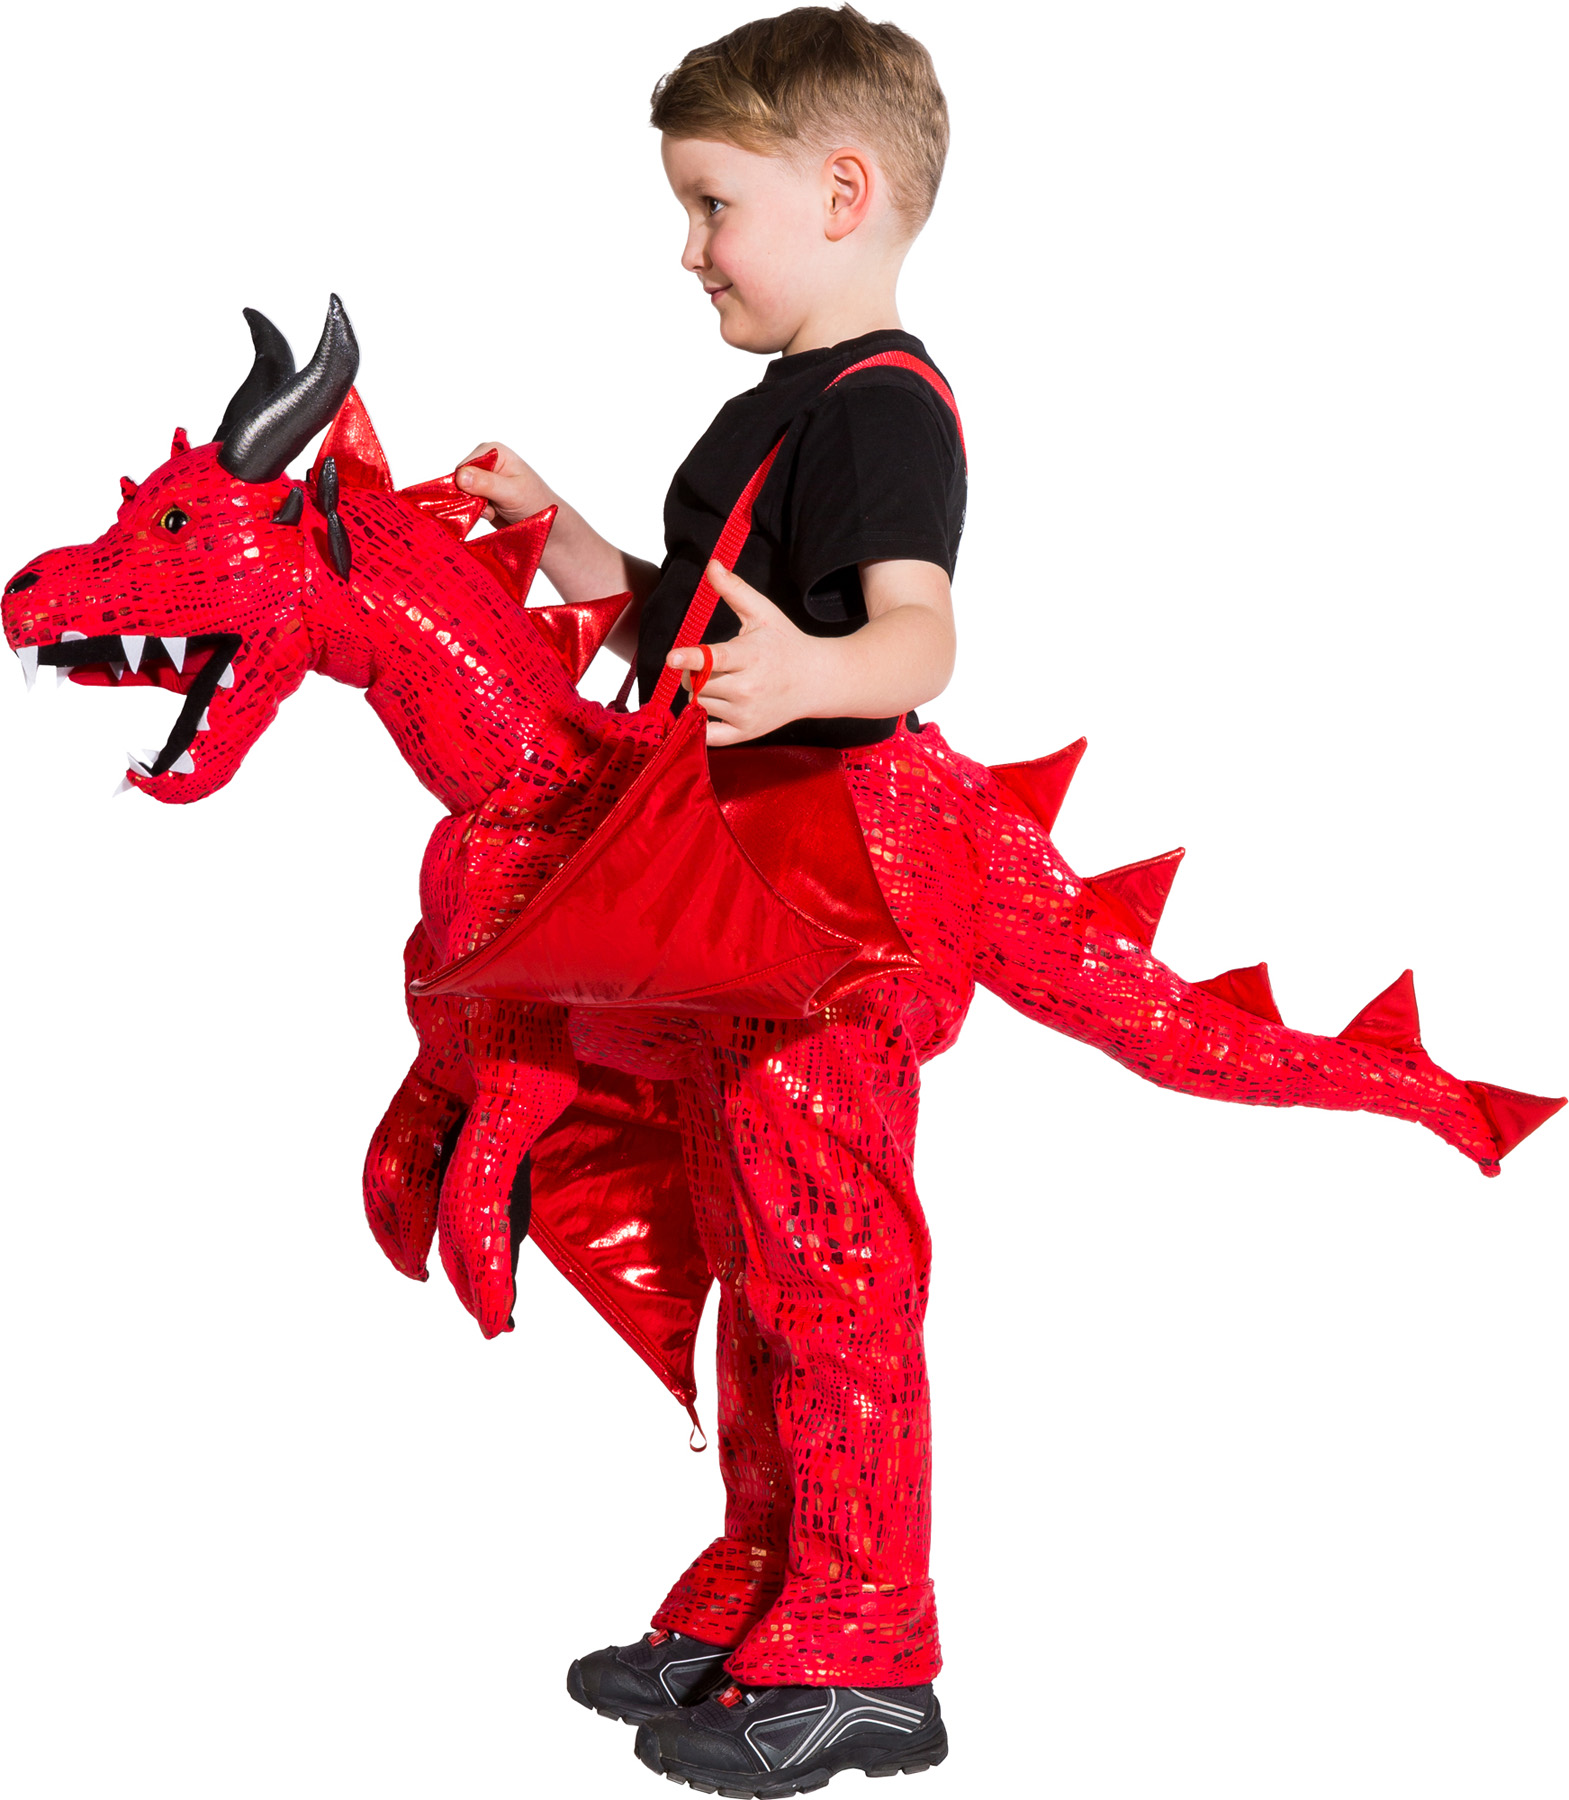 Red dragon ride on costume